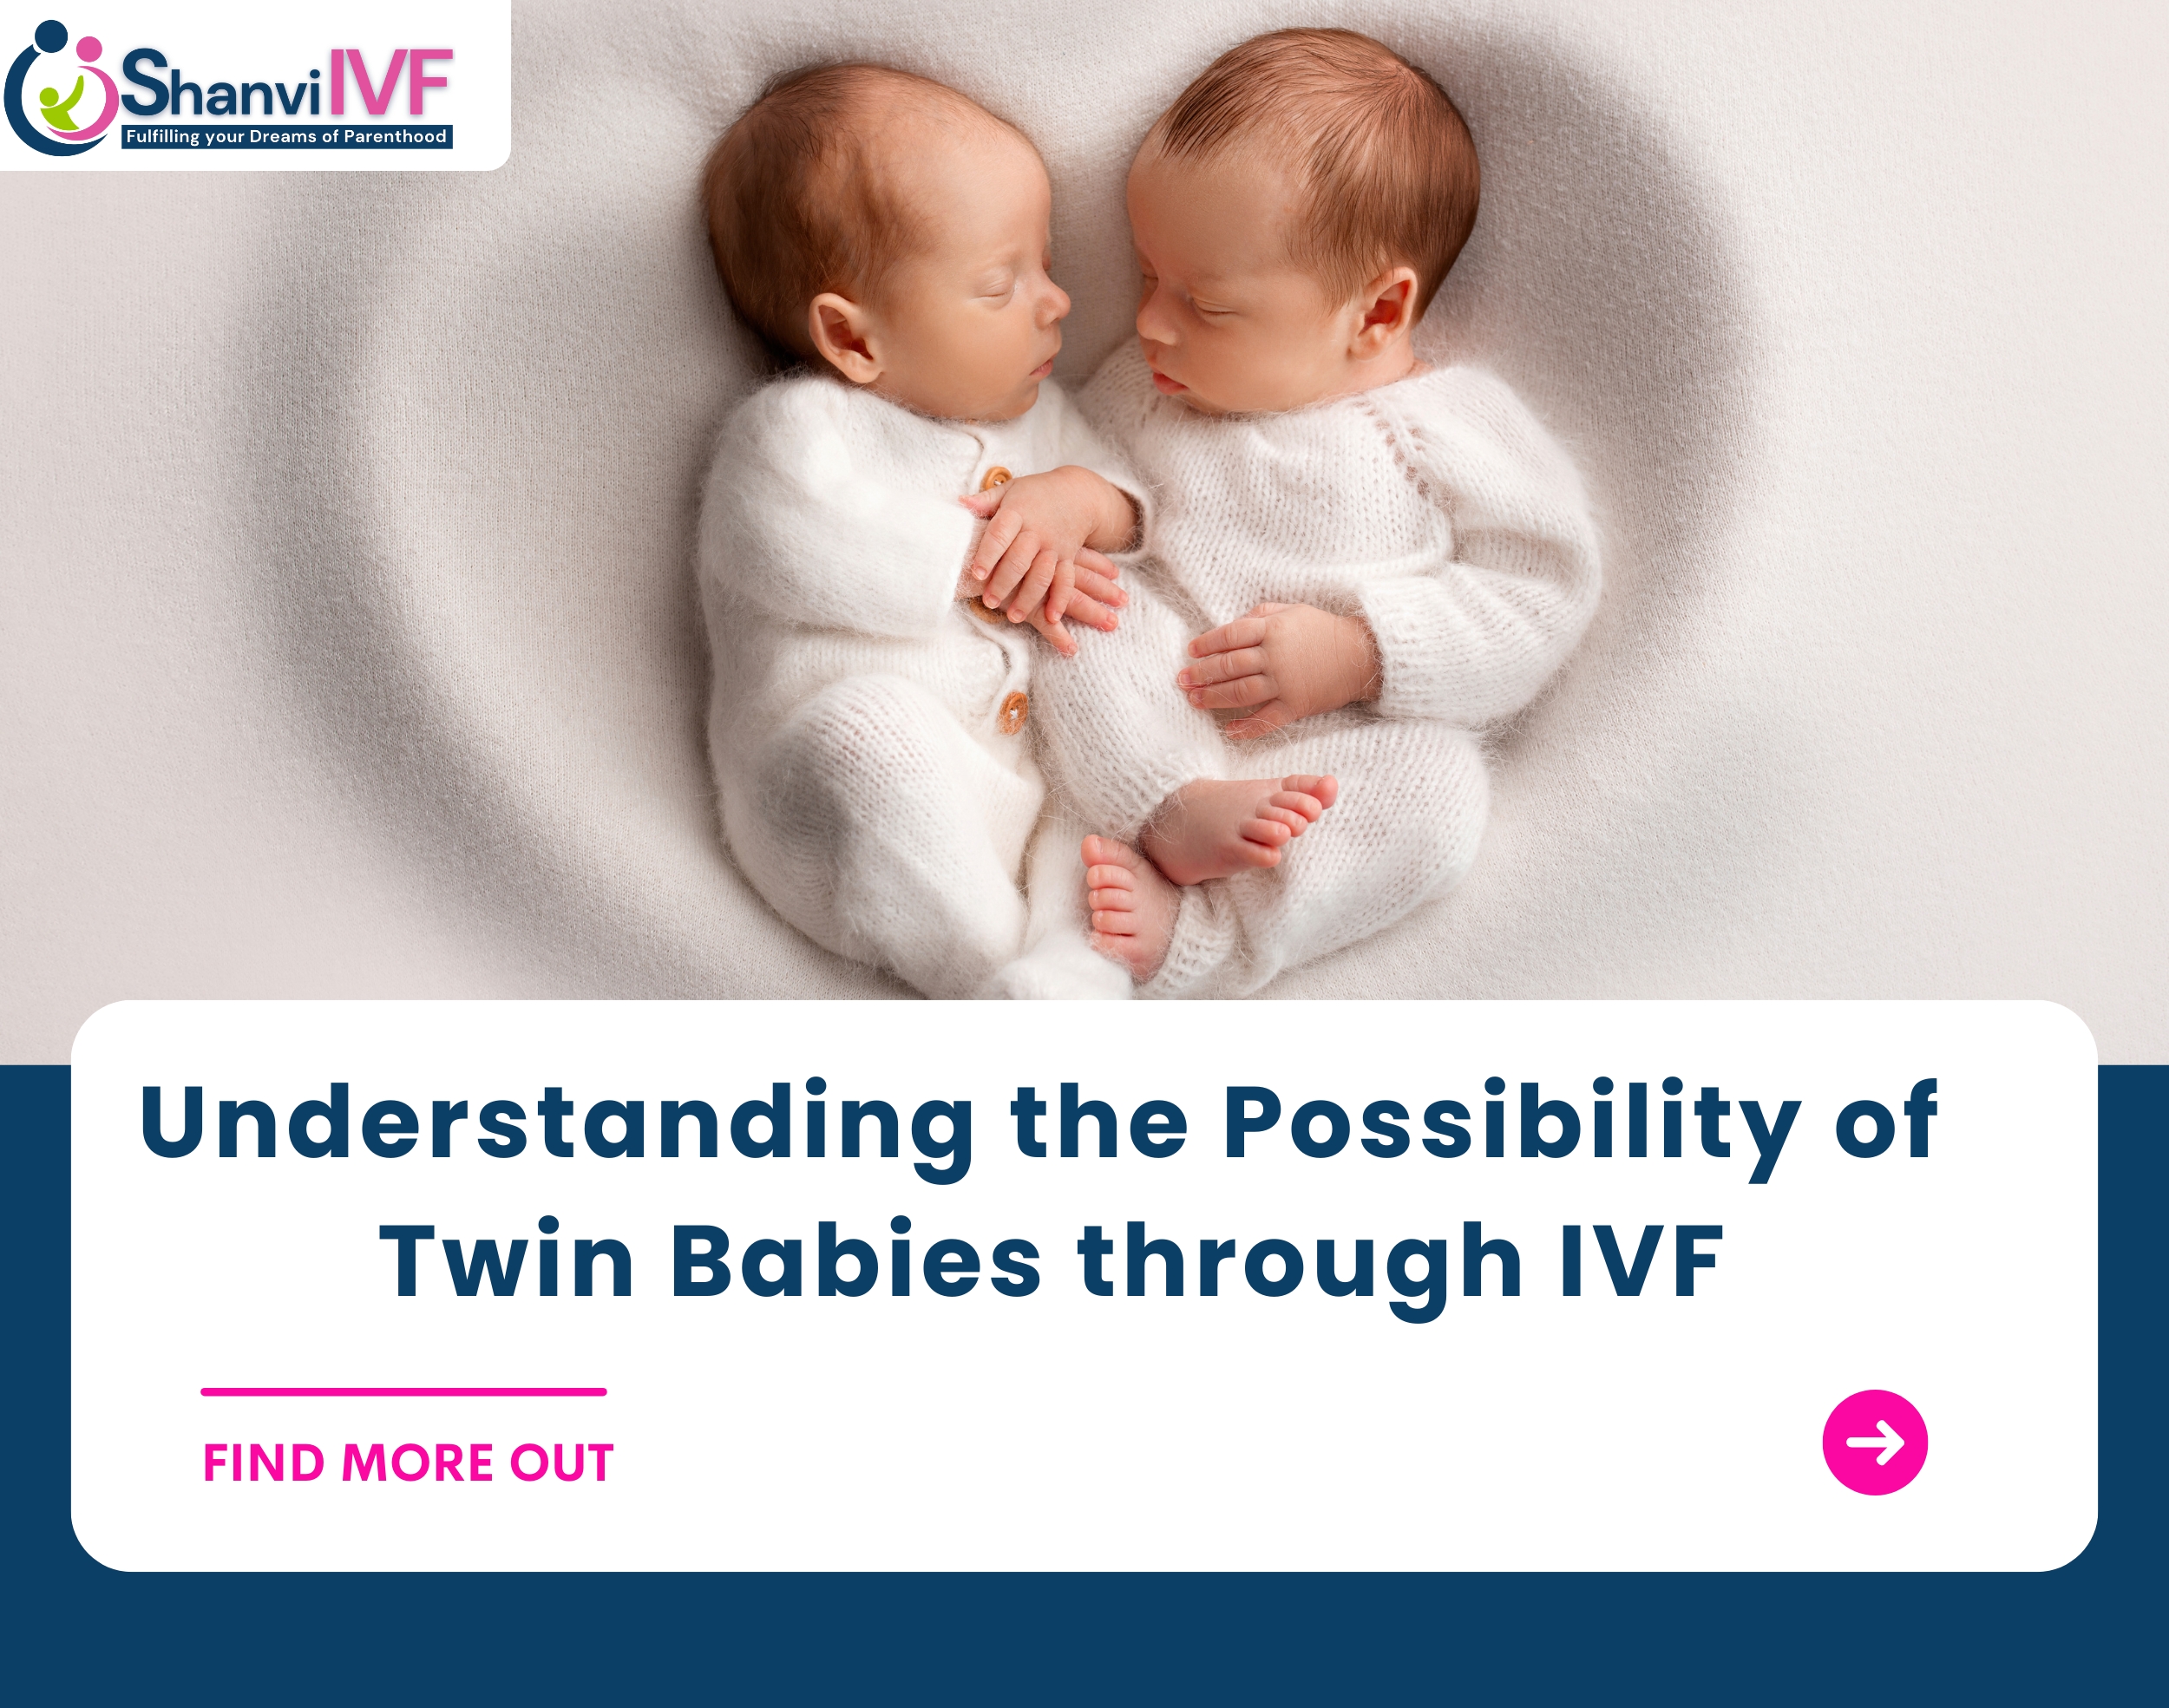 Understanding the Possibility of Twin Babies through IVF